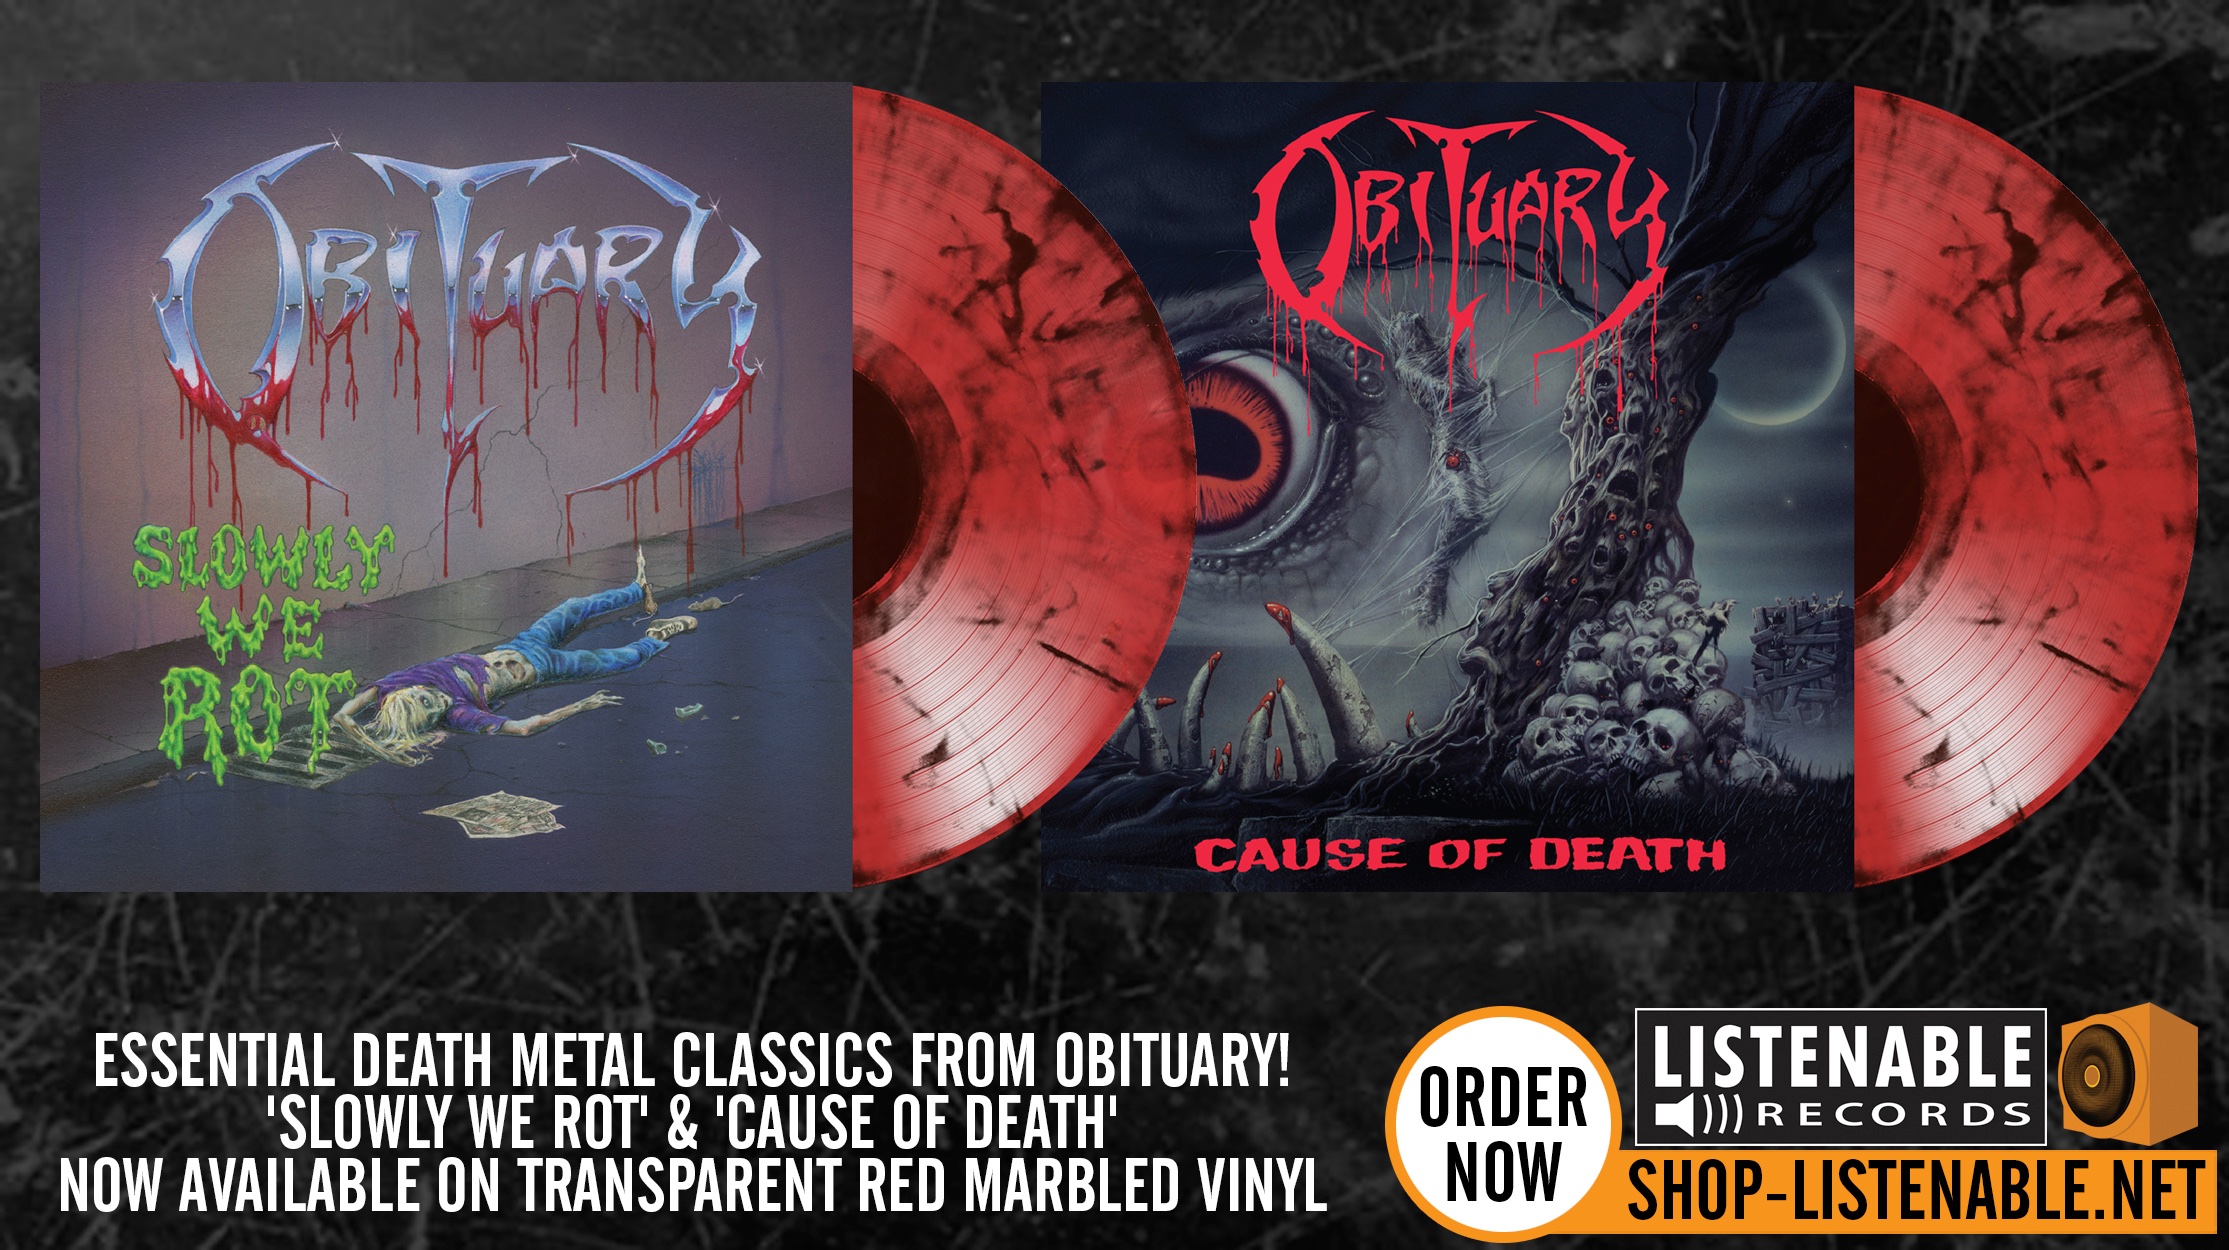 Listenable Records on Twitter: "OBITUARY : 'Slowly we rot' &amp; "Cause death" Limited edition in Transparent red / Black marble vinyl of 500 copies Worldwide ! https://t.co/OZRzf4ouP6 #obituary #listenablerecords # vinyl #vinylcollection #